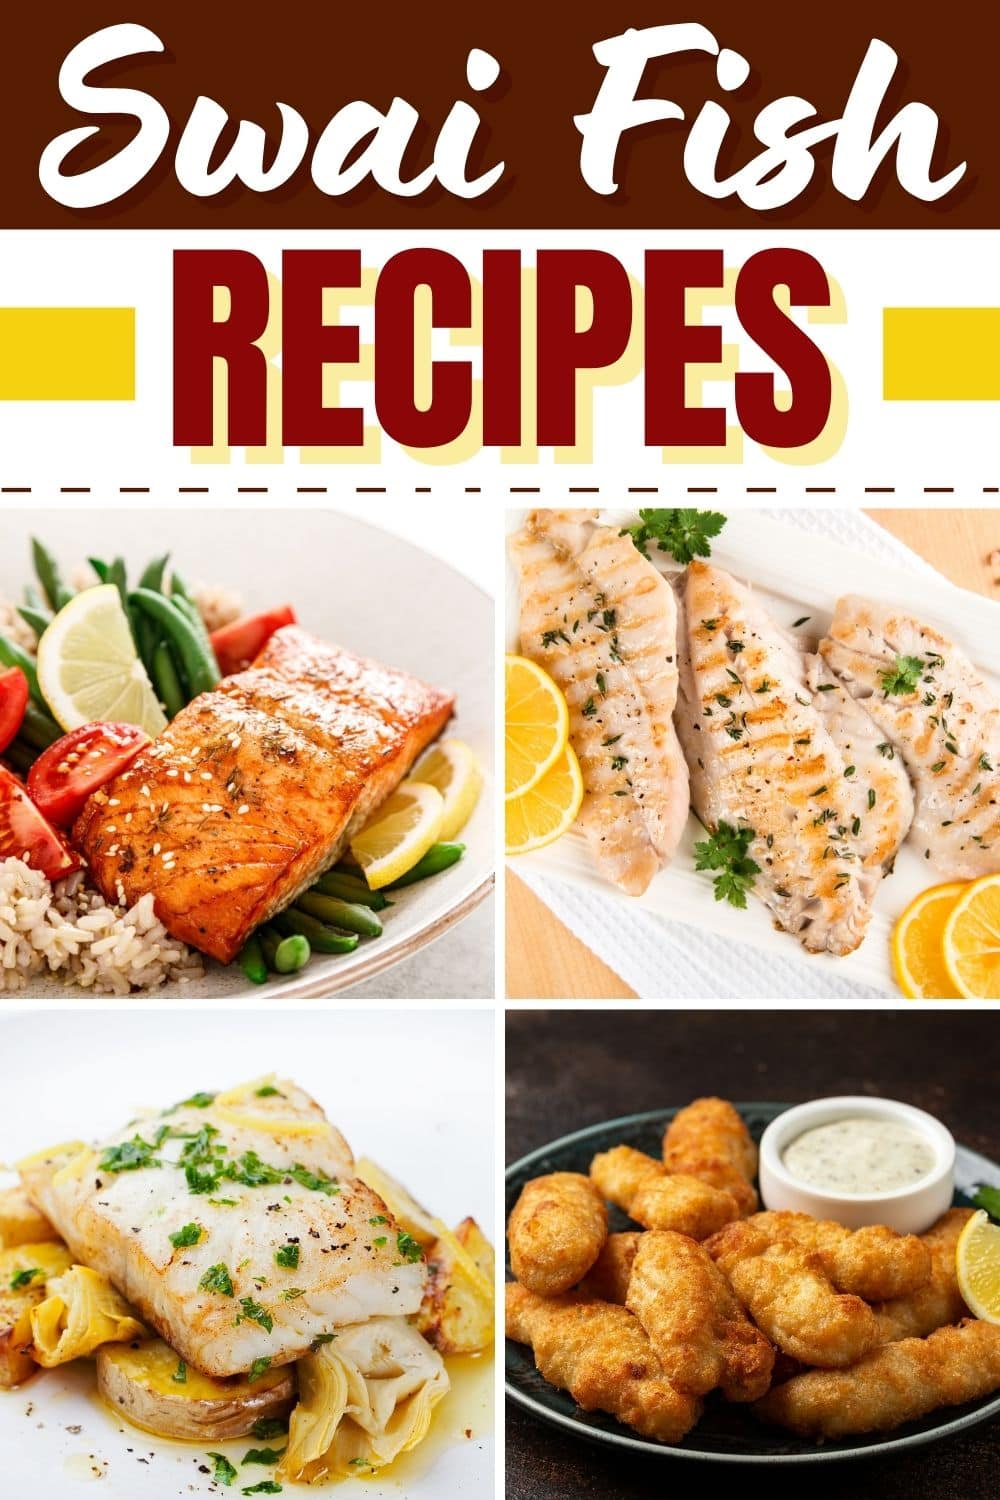 10 Swai Fish Recipes From Baked to Fried - Insanely Good